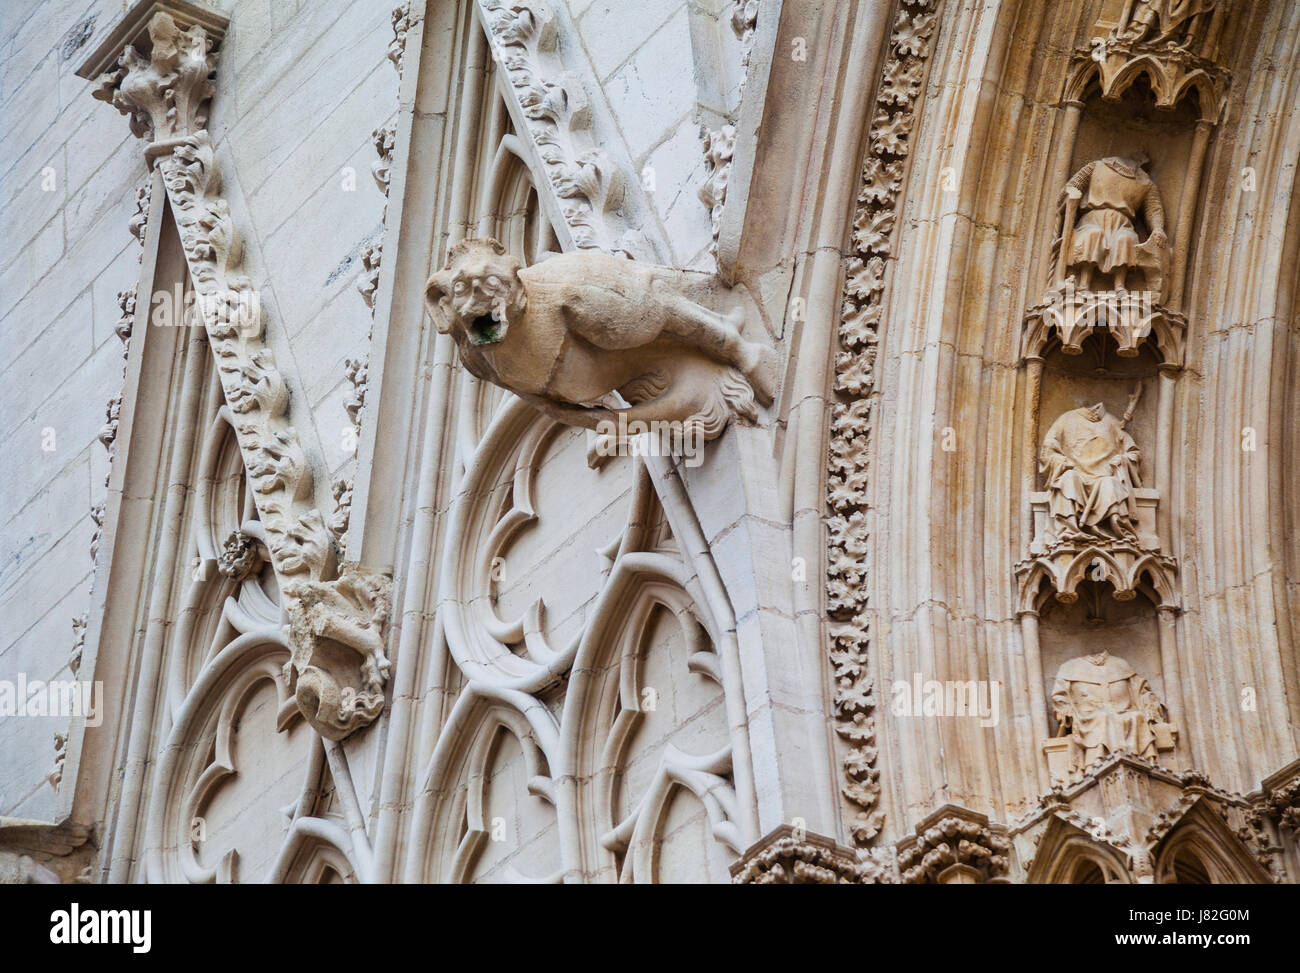 France, Lyon, a gargoyle glares against the backdrop of beheaded angel statues in the alcoves at the front elevation of St. John the Baptist's Cathedr Stock Photo